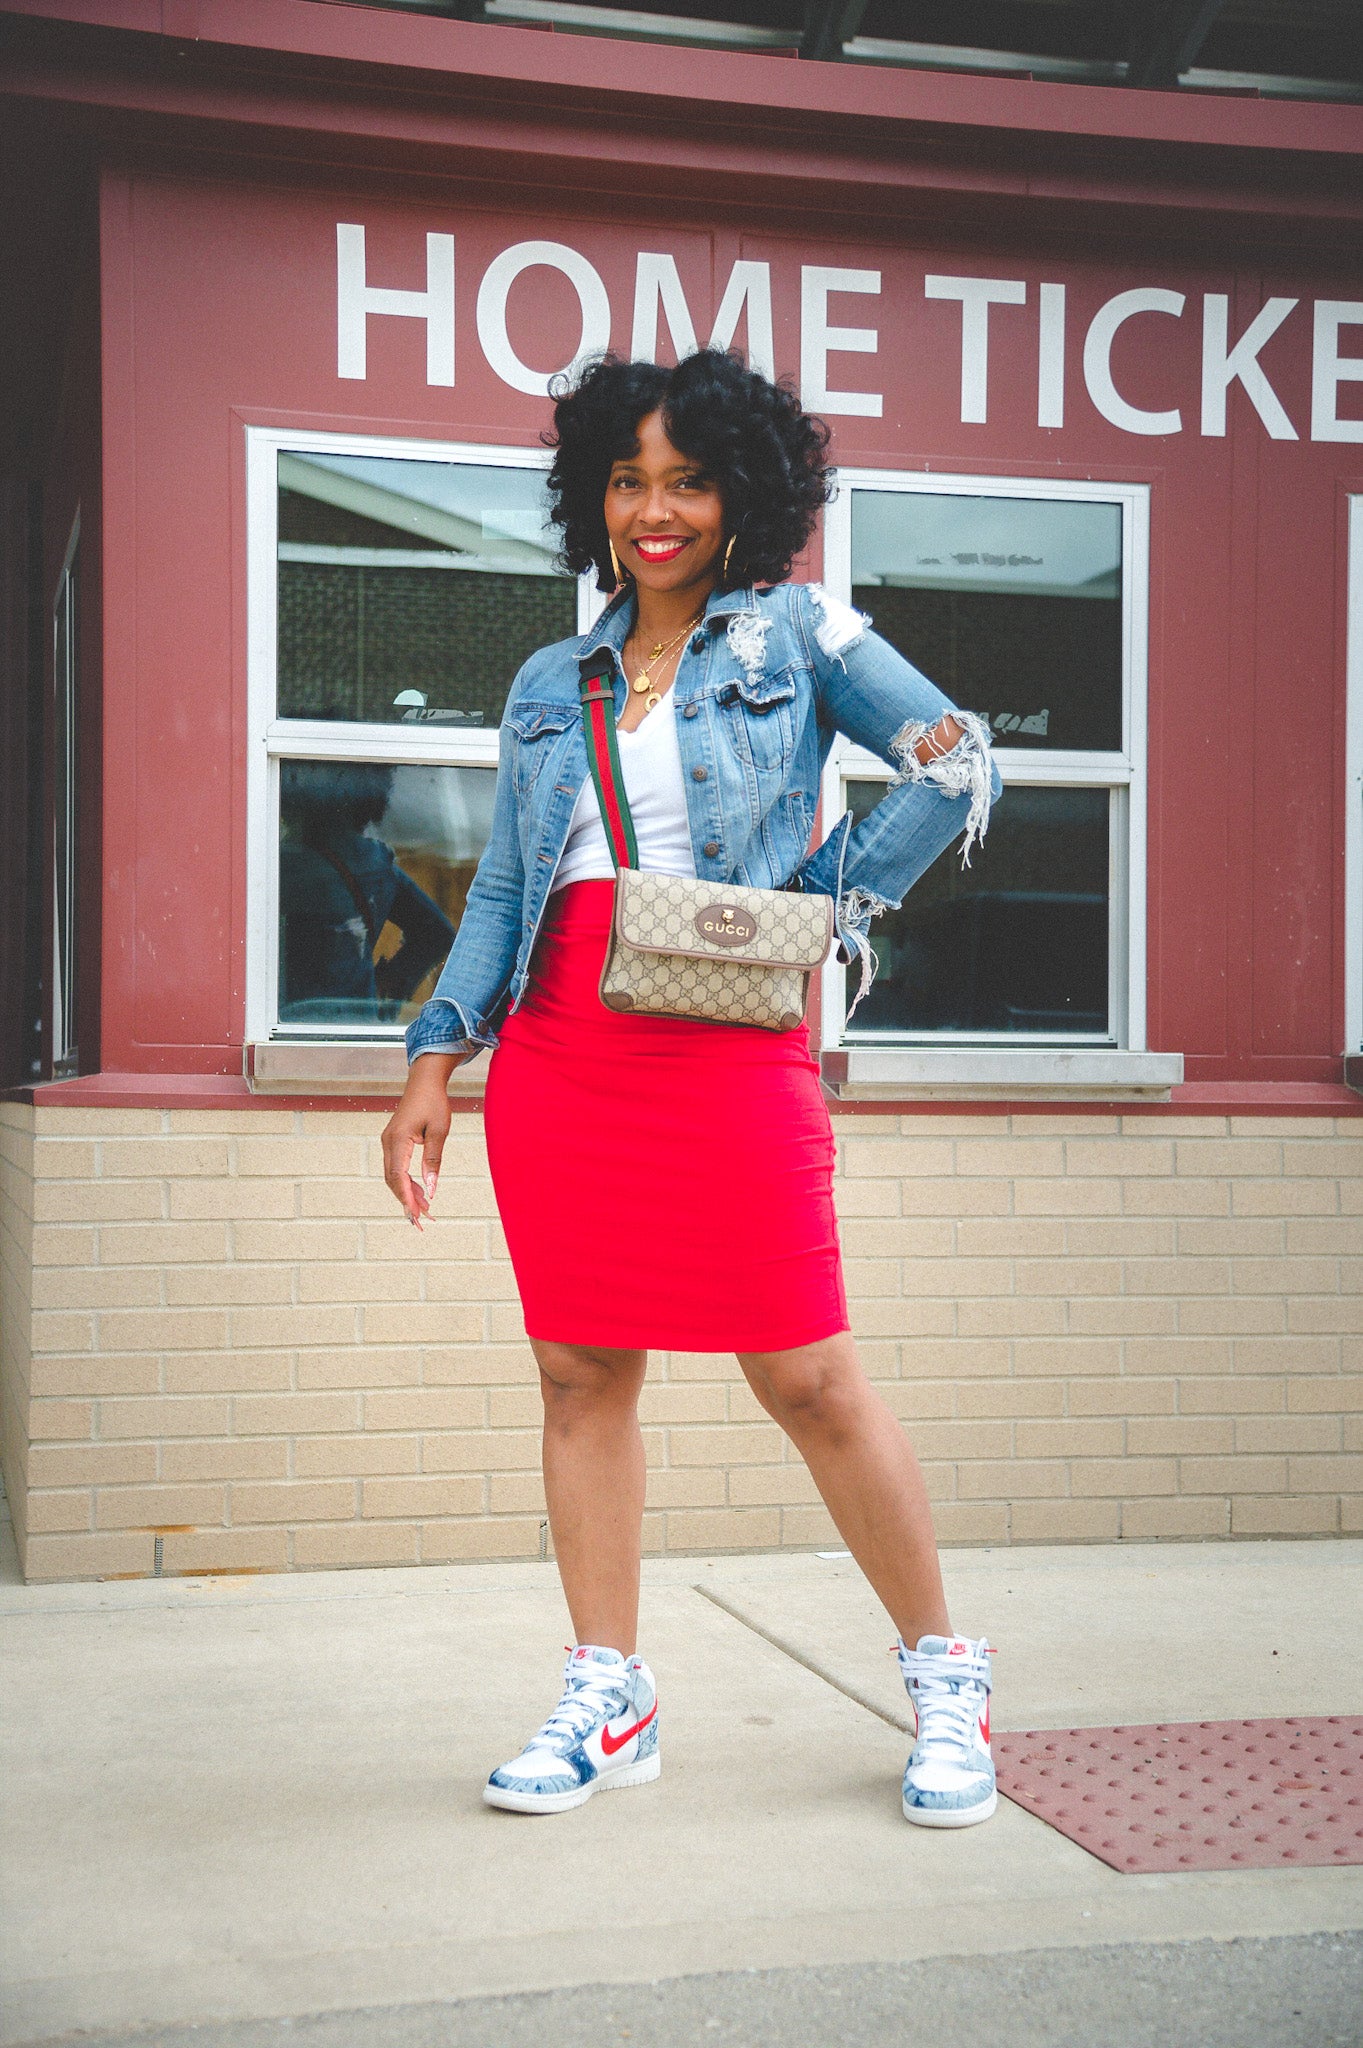 See-More Jean Skirts - ❤️HAPPY MONDAY! OUR BURGUNDY SKIRT NOW IS AVAILABLE  IN MID LENGTH..ITS ALSO SUPER CUTE PAIRED WITH OUR “BEE KIND” GRAPHIC TEE..  Shop➡️ https://seemorejeanskirts.storenvy.com/products #seemorejeanskirts  #pentecostal #apostolic ...